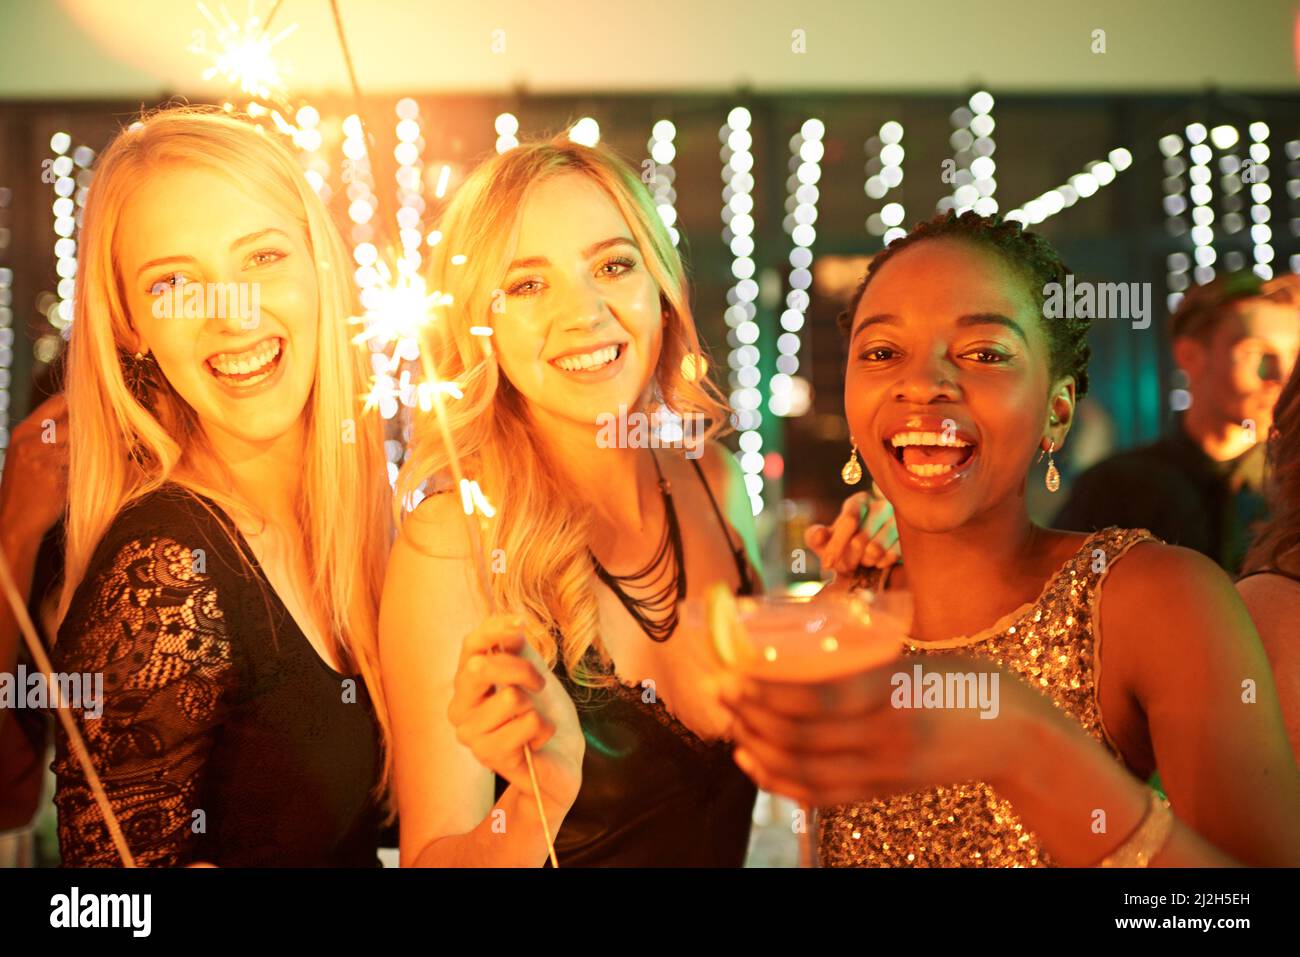 Because a little party never hurt anybody. Shot of a group of girlfriends having fun with sparklers on a night out. Stock Photo